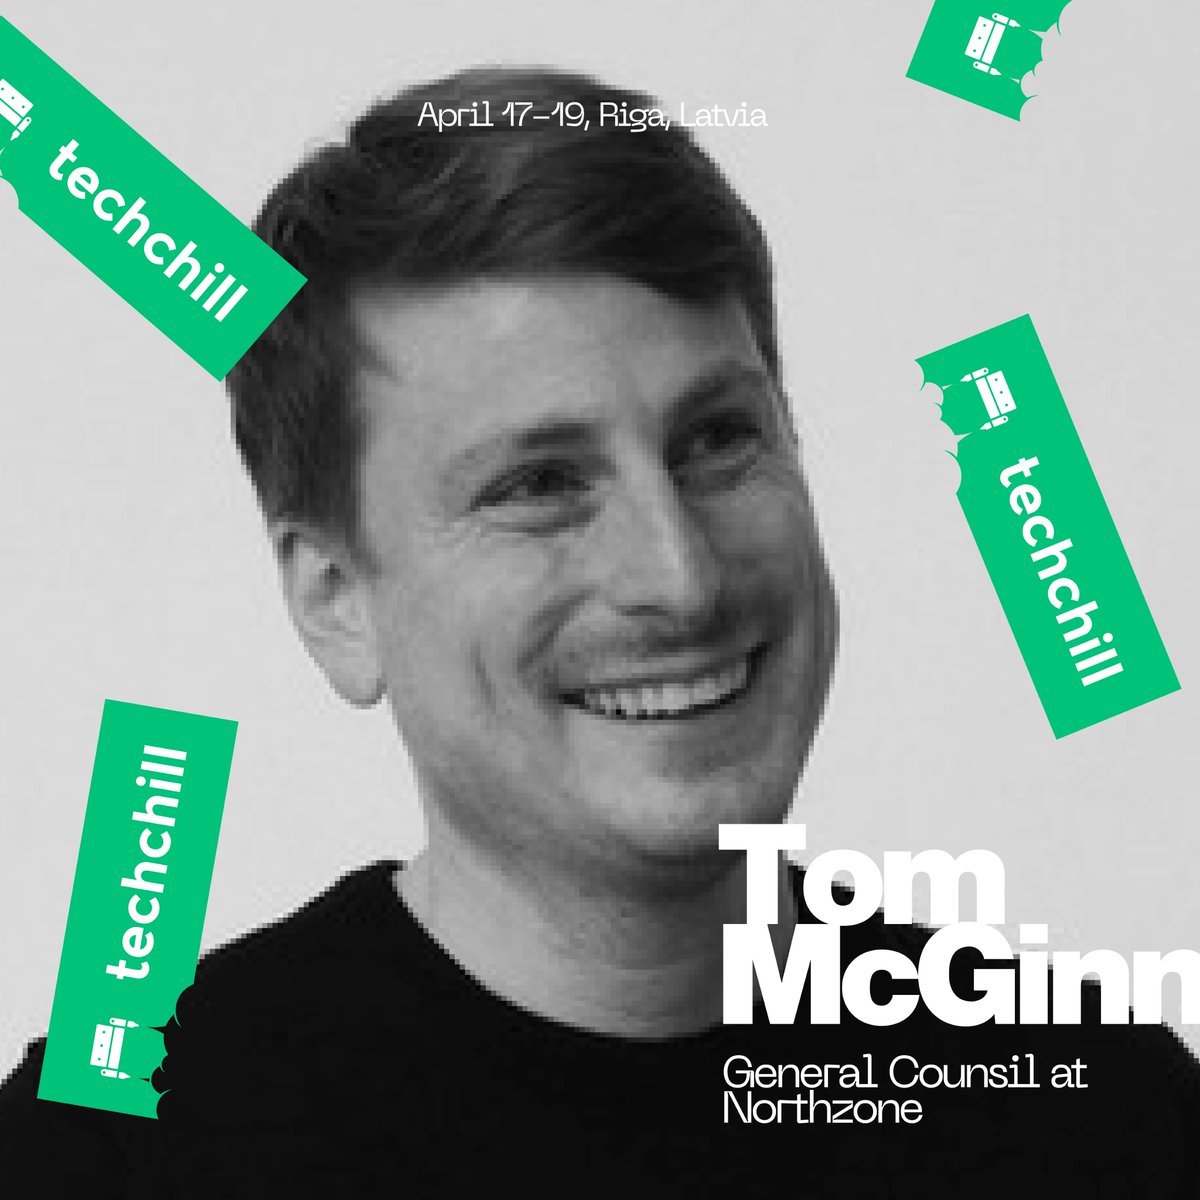 🌟 Excited to announce Tom McGinn, General Counsel at @northzoneVC, as a speaker for TechChill 2024! With vast startup support experience and legal background, Tom brings invaluable insights. Don't miss him in Riga on April 17-19! 🚀 Get your tickets: techchill.co/get-pass